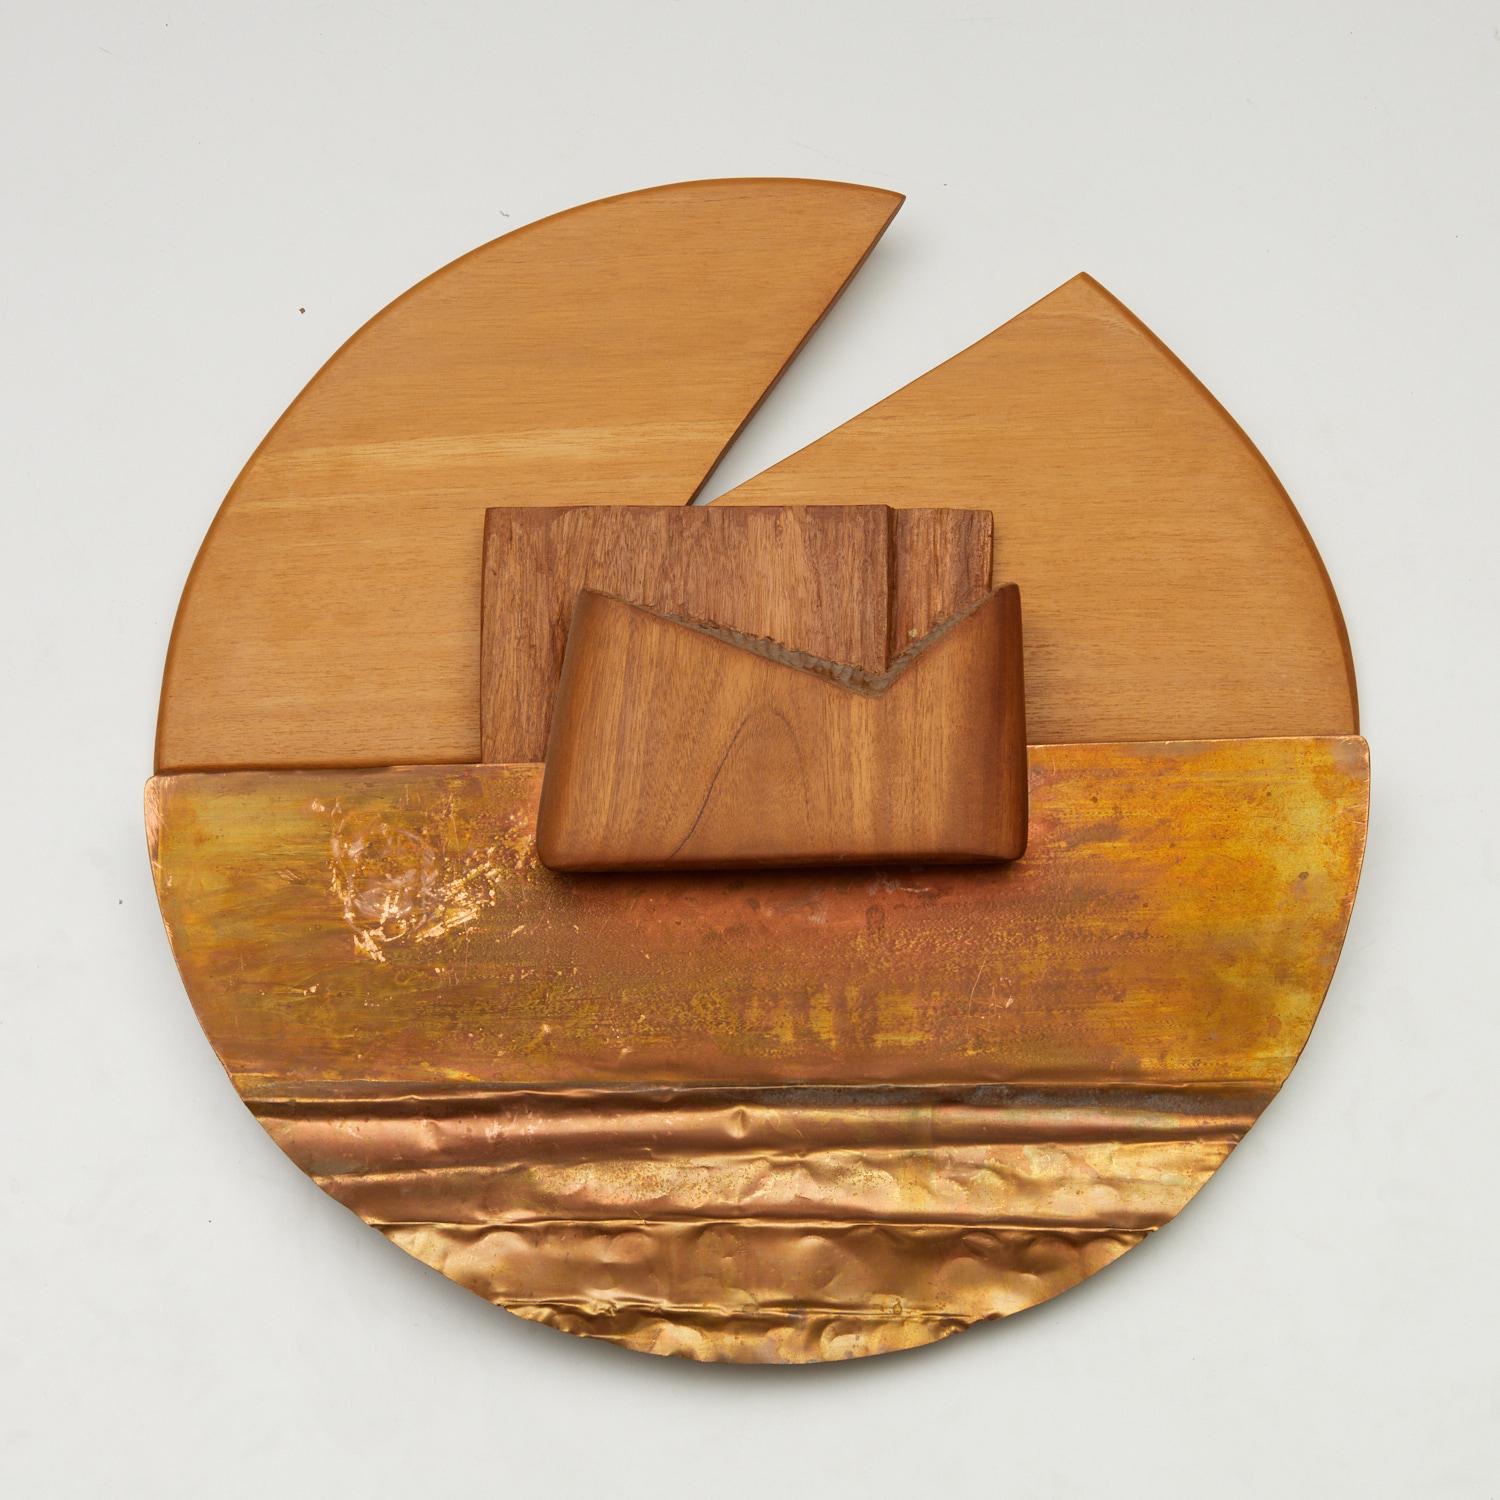 AUGUSTA BENAVIDES, WOOD AND COPPER